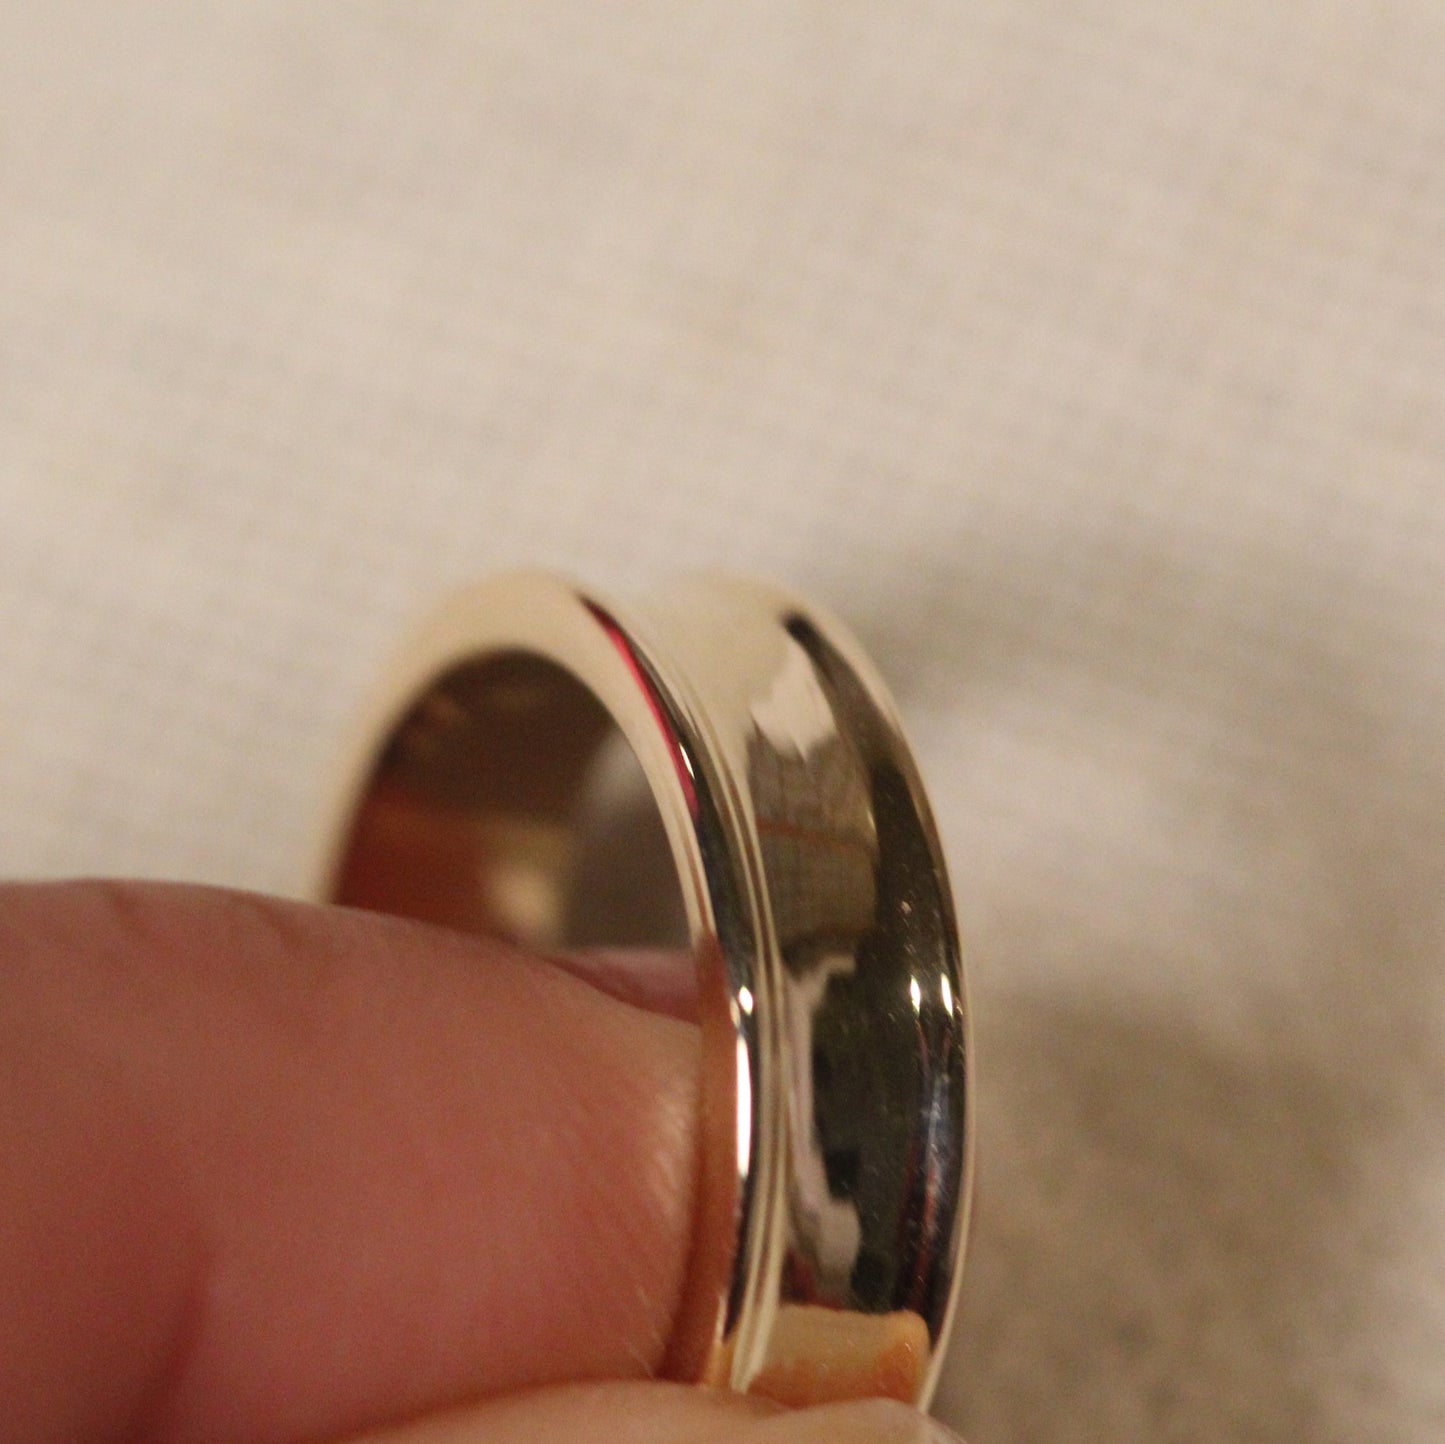 14k Solid Gold 5mm Concave Wedding Band